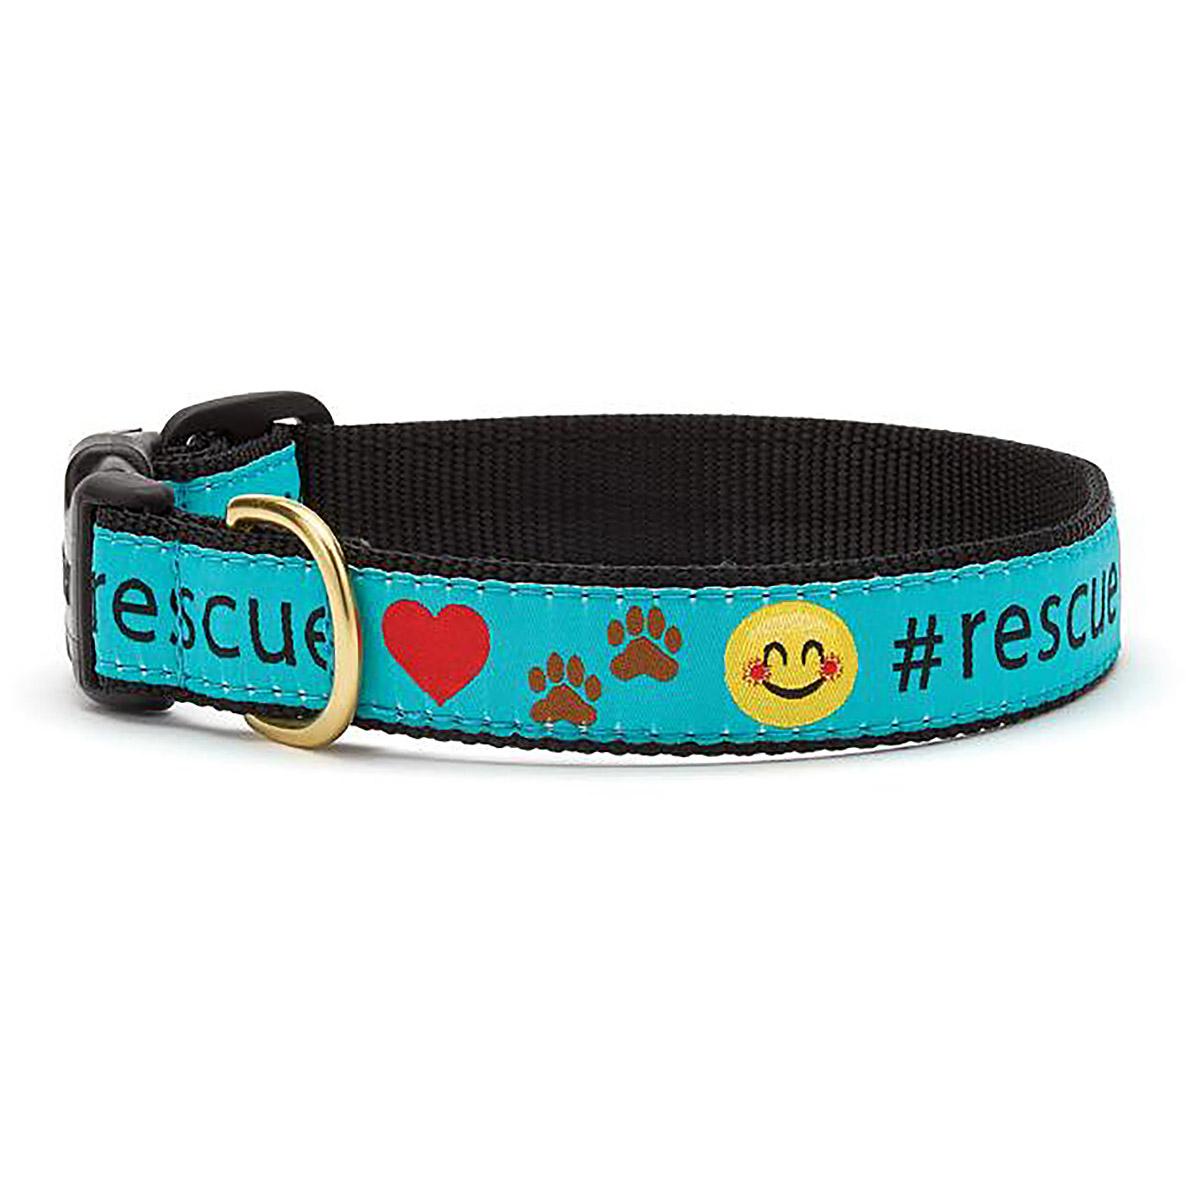 #Rescue Dog Collar by Up Country